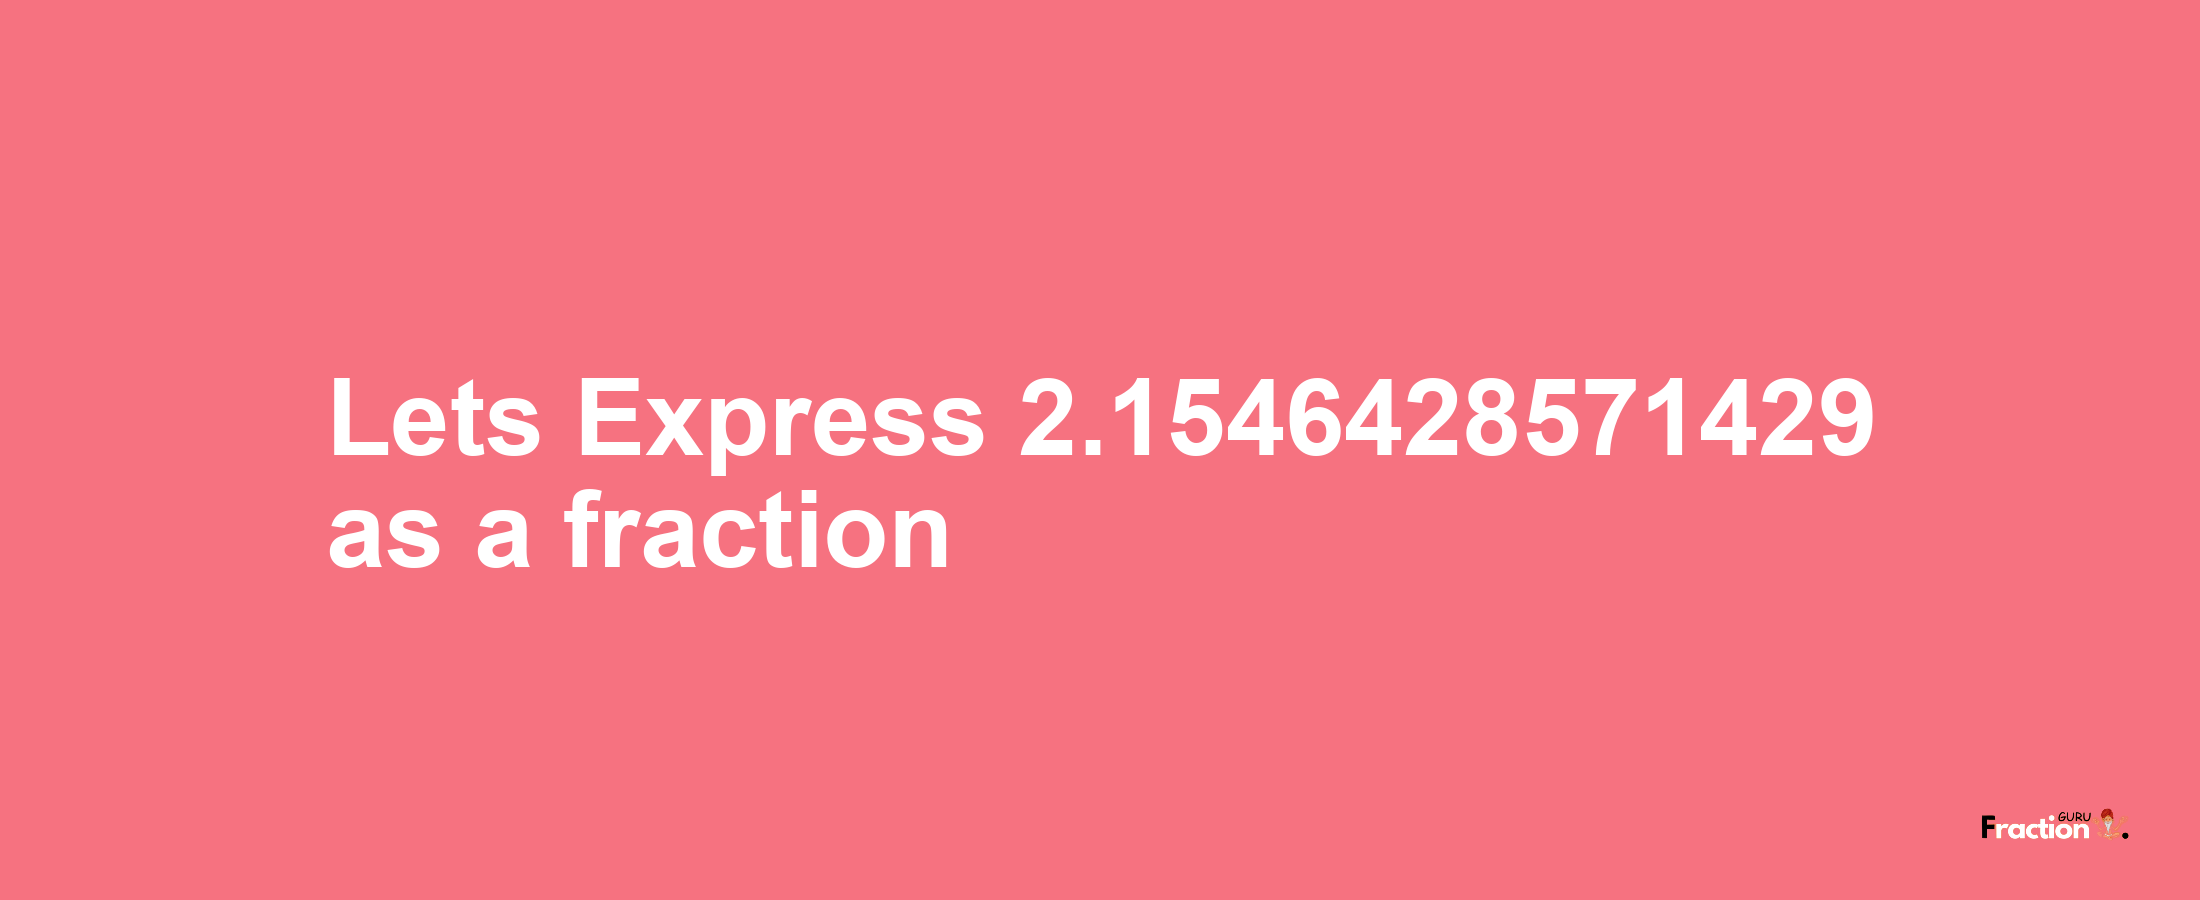 Lets Express 2.1546428571429 as afraction